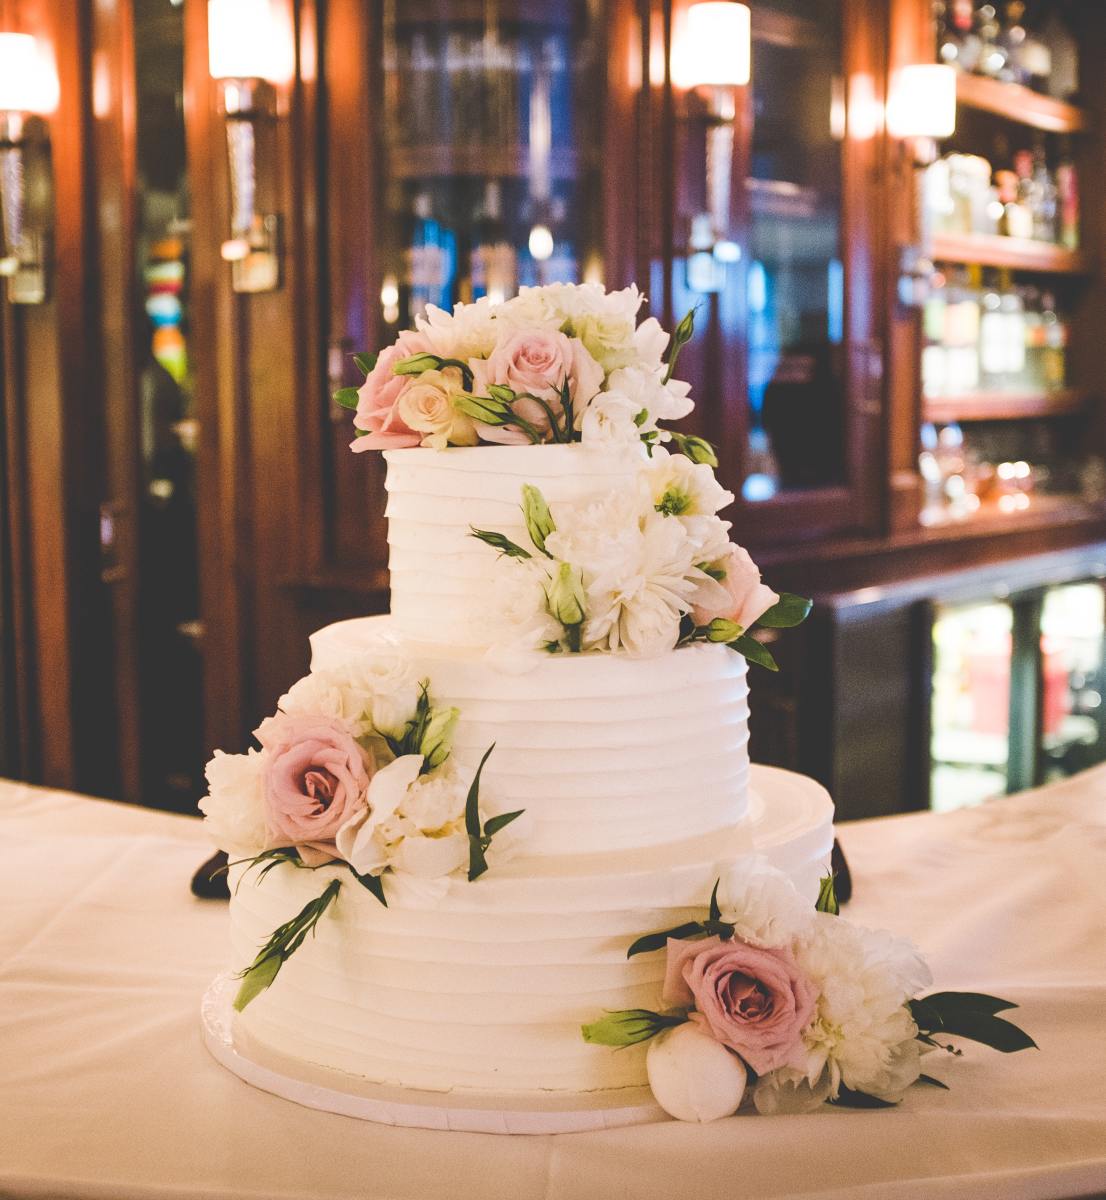 the-dos-and-donts-when-ordering-your-wedding-cake-a-cake-artists-perspective